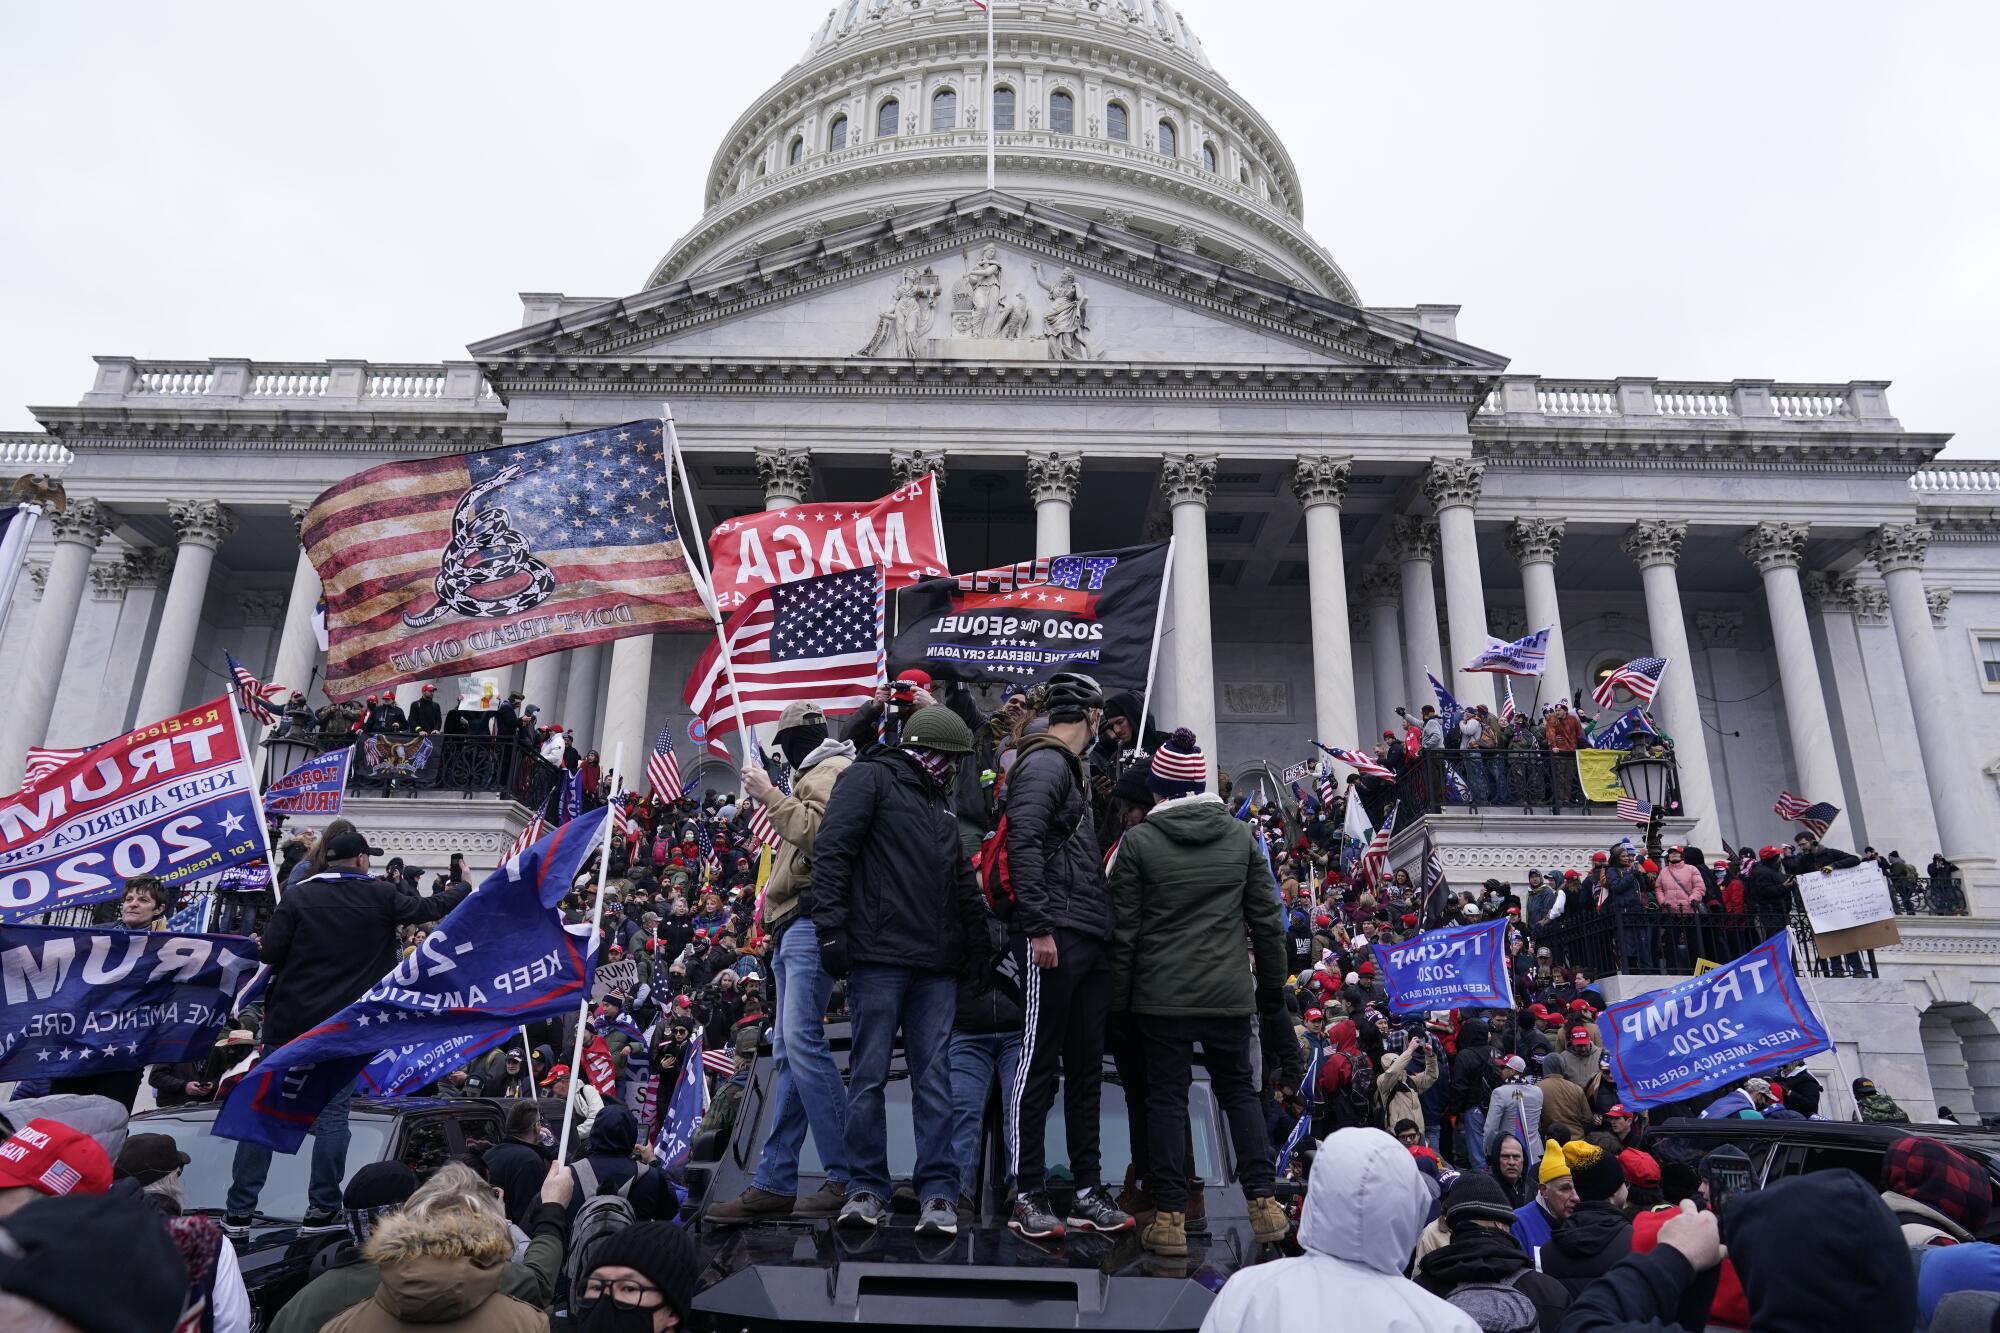 A crowd of people with Trump 2020 and MAGA flags stand on an armored police vehicle and the Capitol steps